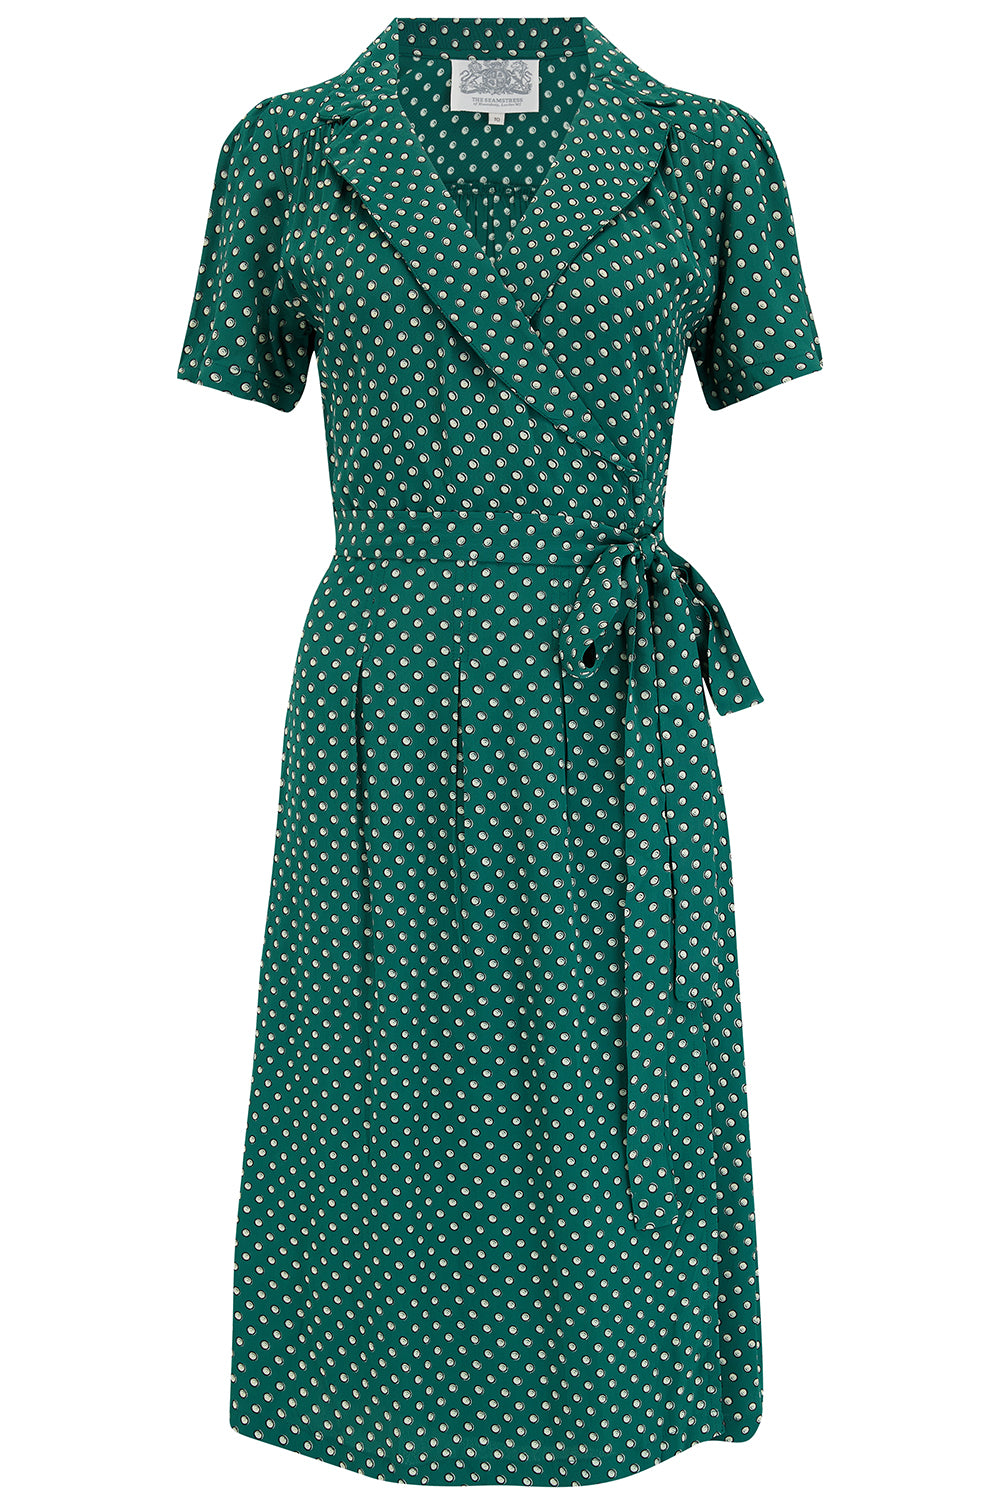 Peggy Wrap Dress In Green Ditzy Dot , Classic 1940s True Vintage Style - True and authentic vintage style clothing, inspired by the Classic styles of CC41 , WW2 and the fun 1950s RocknRoll era, for everyday wear plus events like Goodwood Revival, Twinwood Festival and Viva Las Vegas Rockabilly Weekend Rock n Romance The Seamstress of Bloomsbury